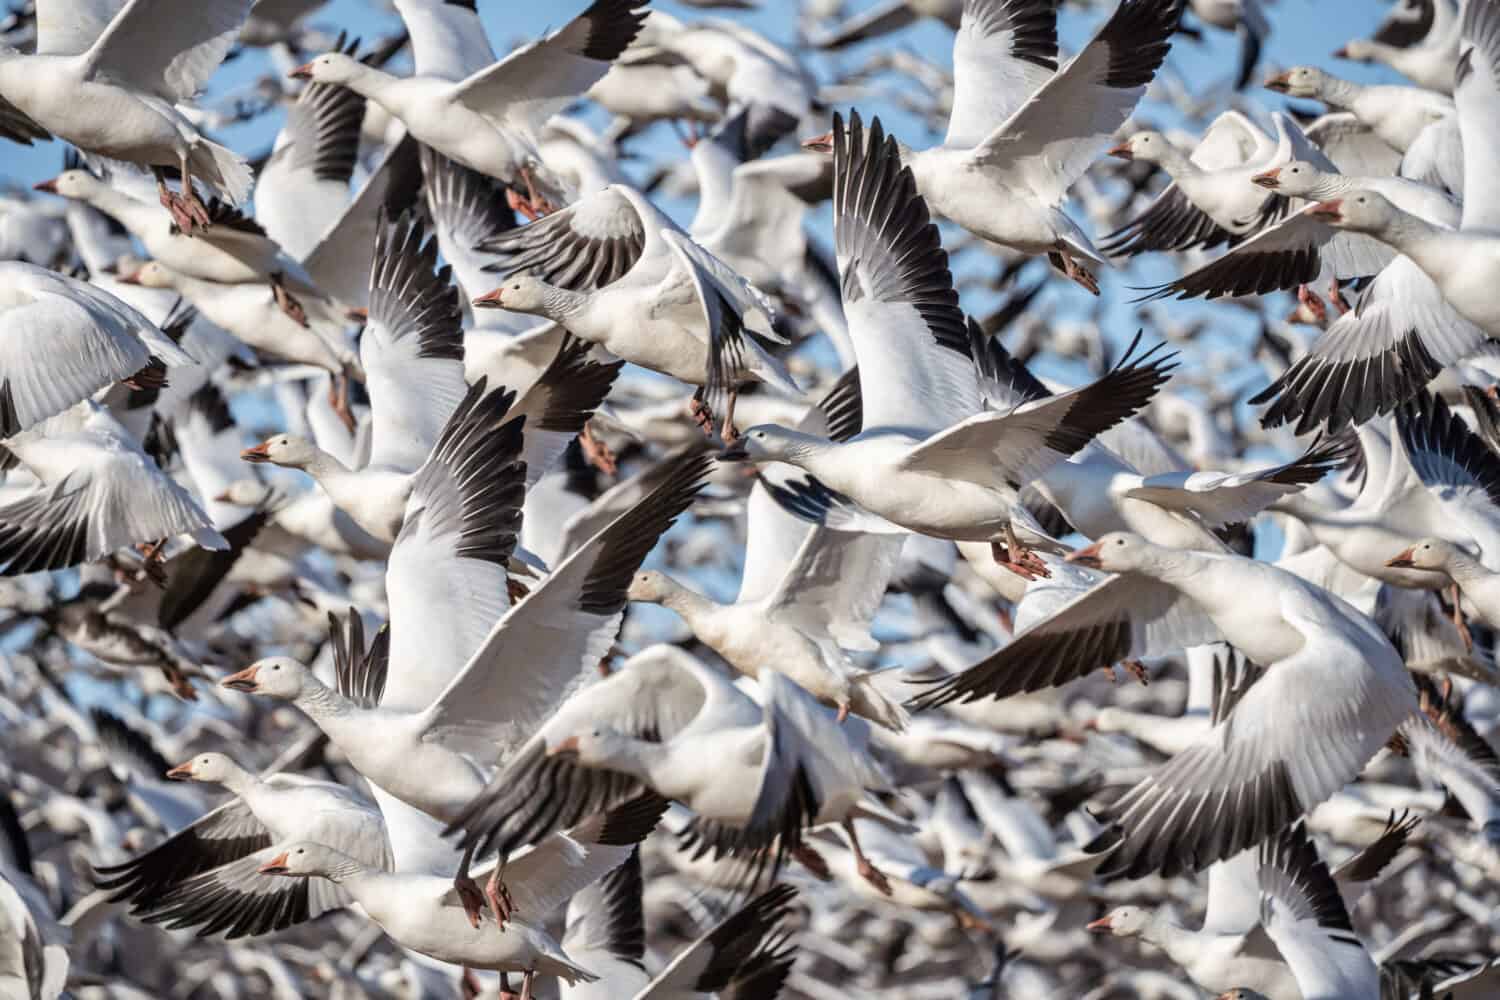 Large flock of Snow Geese at Middle Creek Wildlife Management Area Reserve in Lancaster County, Pennsylvania, USA